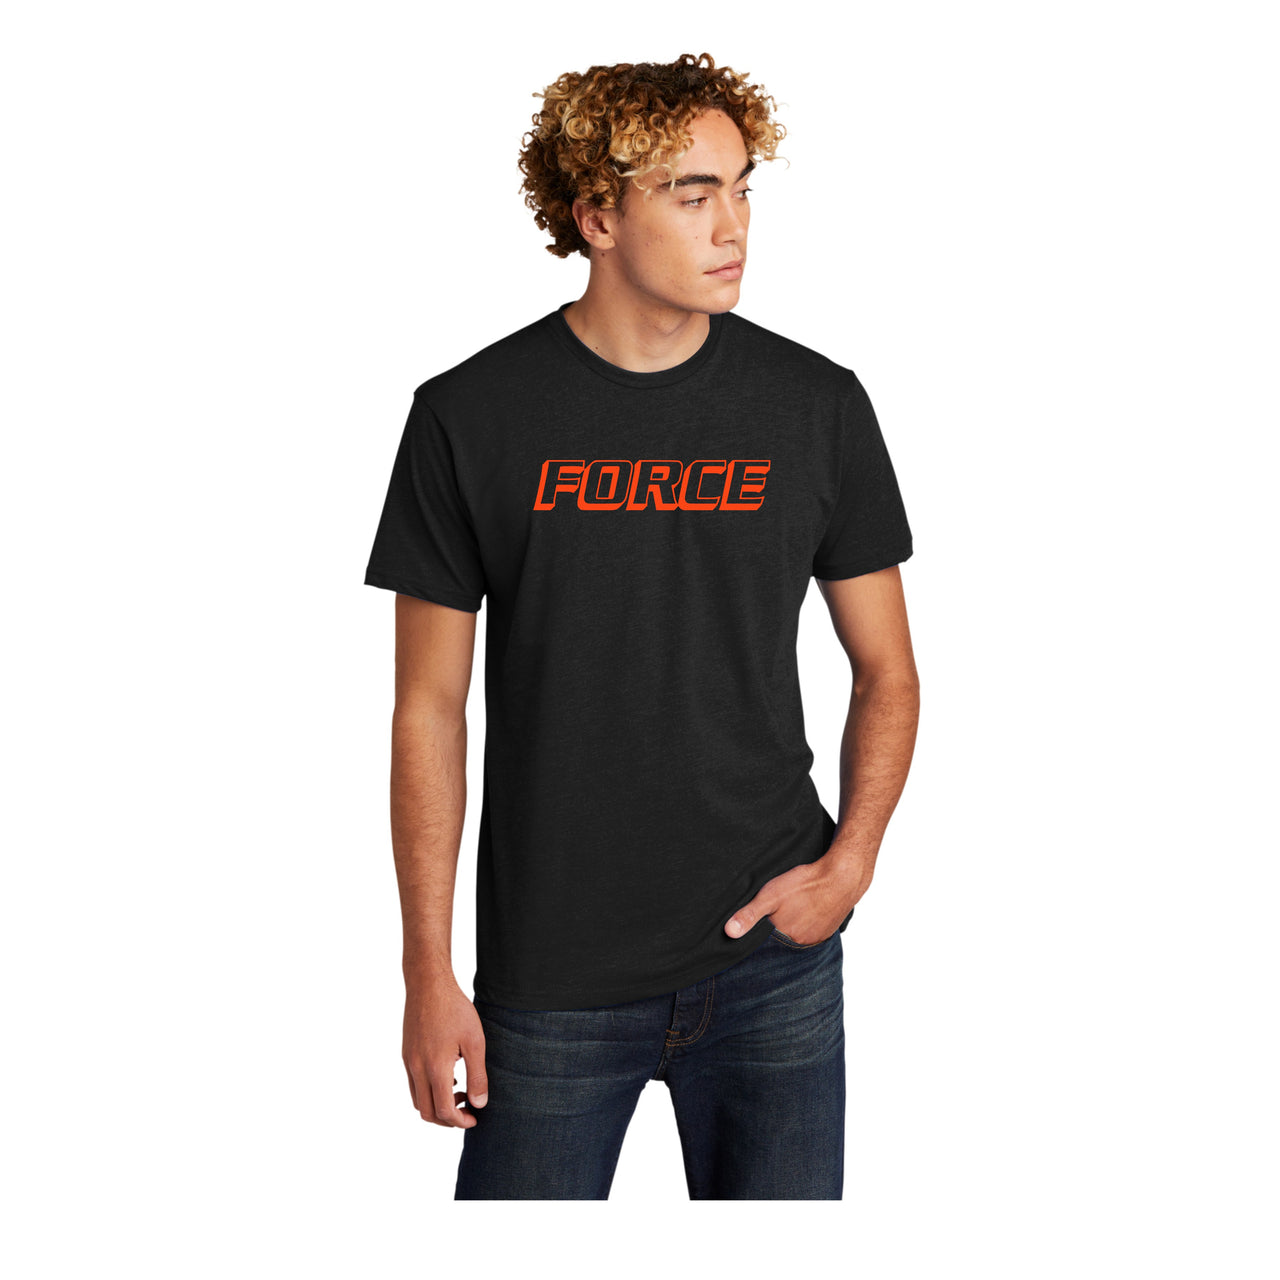 Adult - Unisex Cotton/Poly Tee (Force Softball)